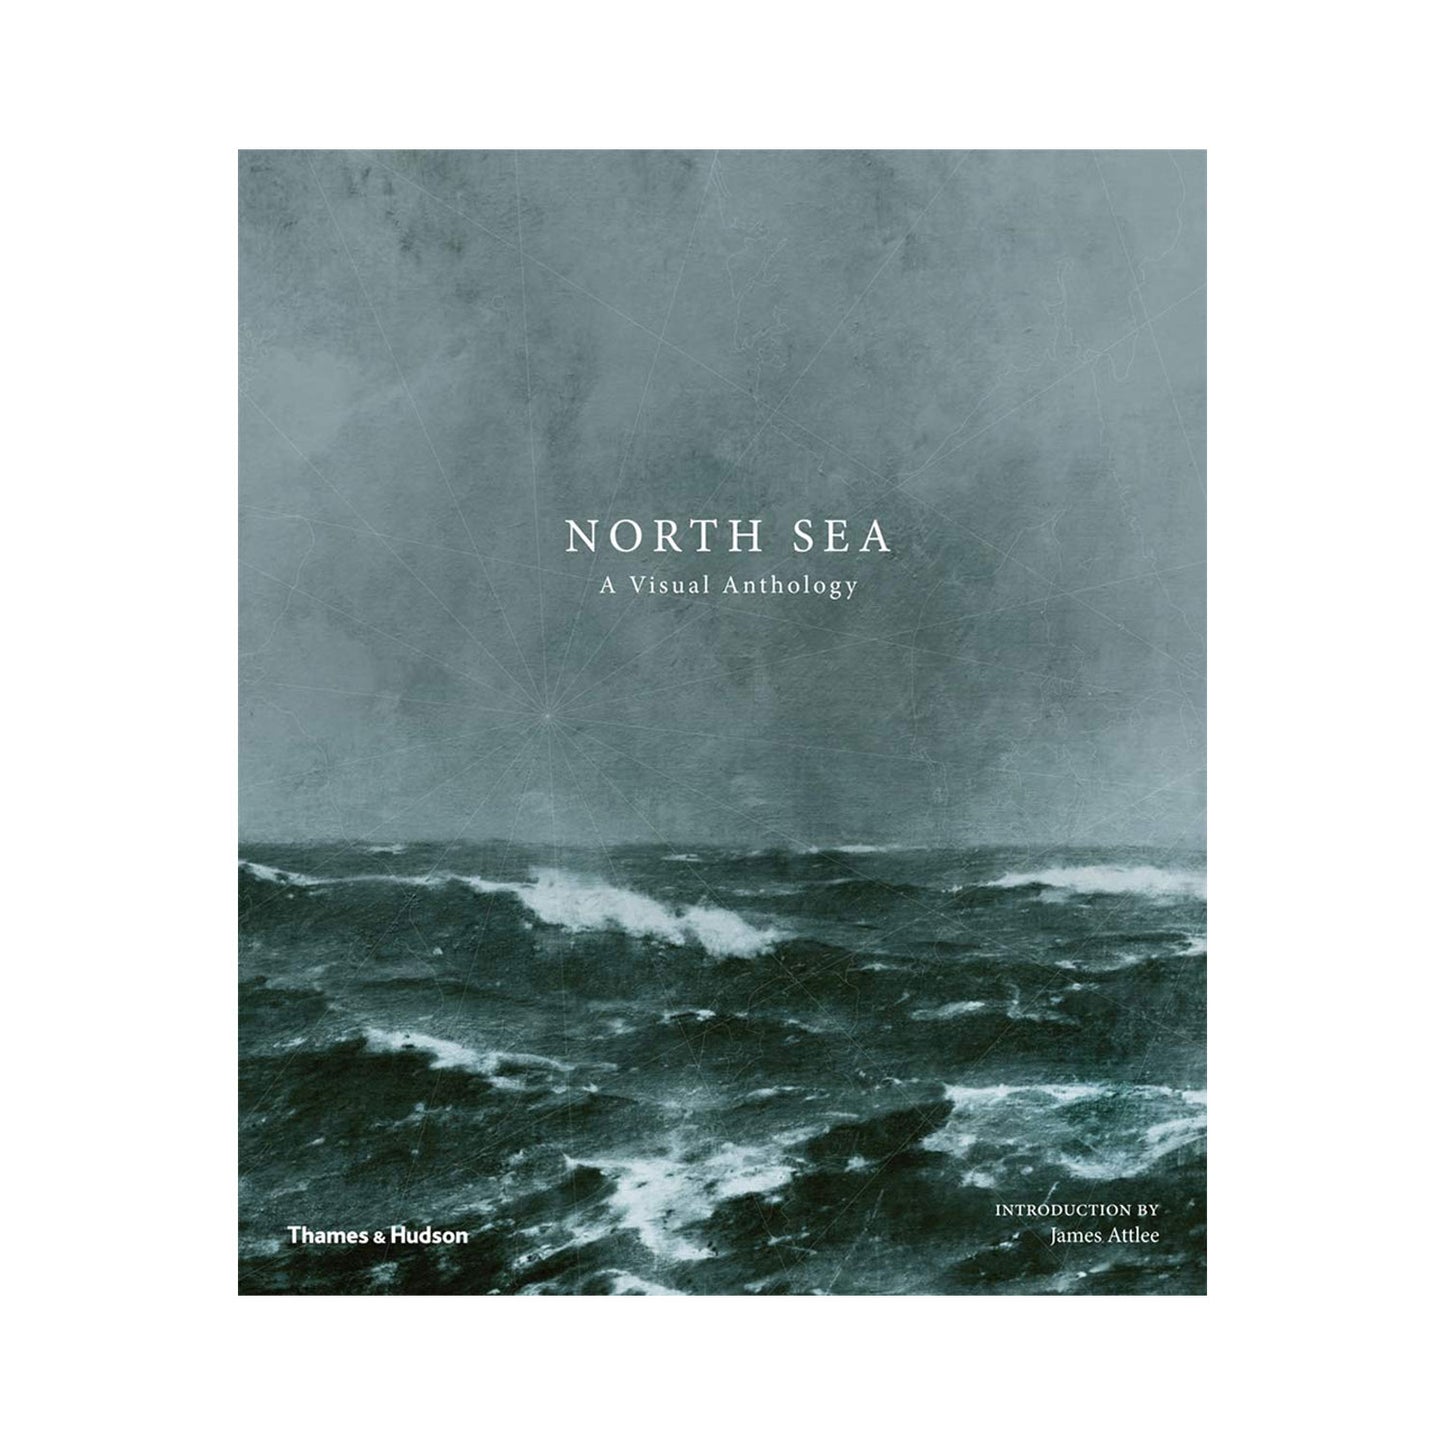 North Sea: A Visual Anthology by James Attlee Photo Museum Ireland